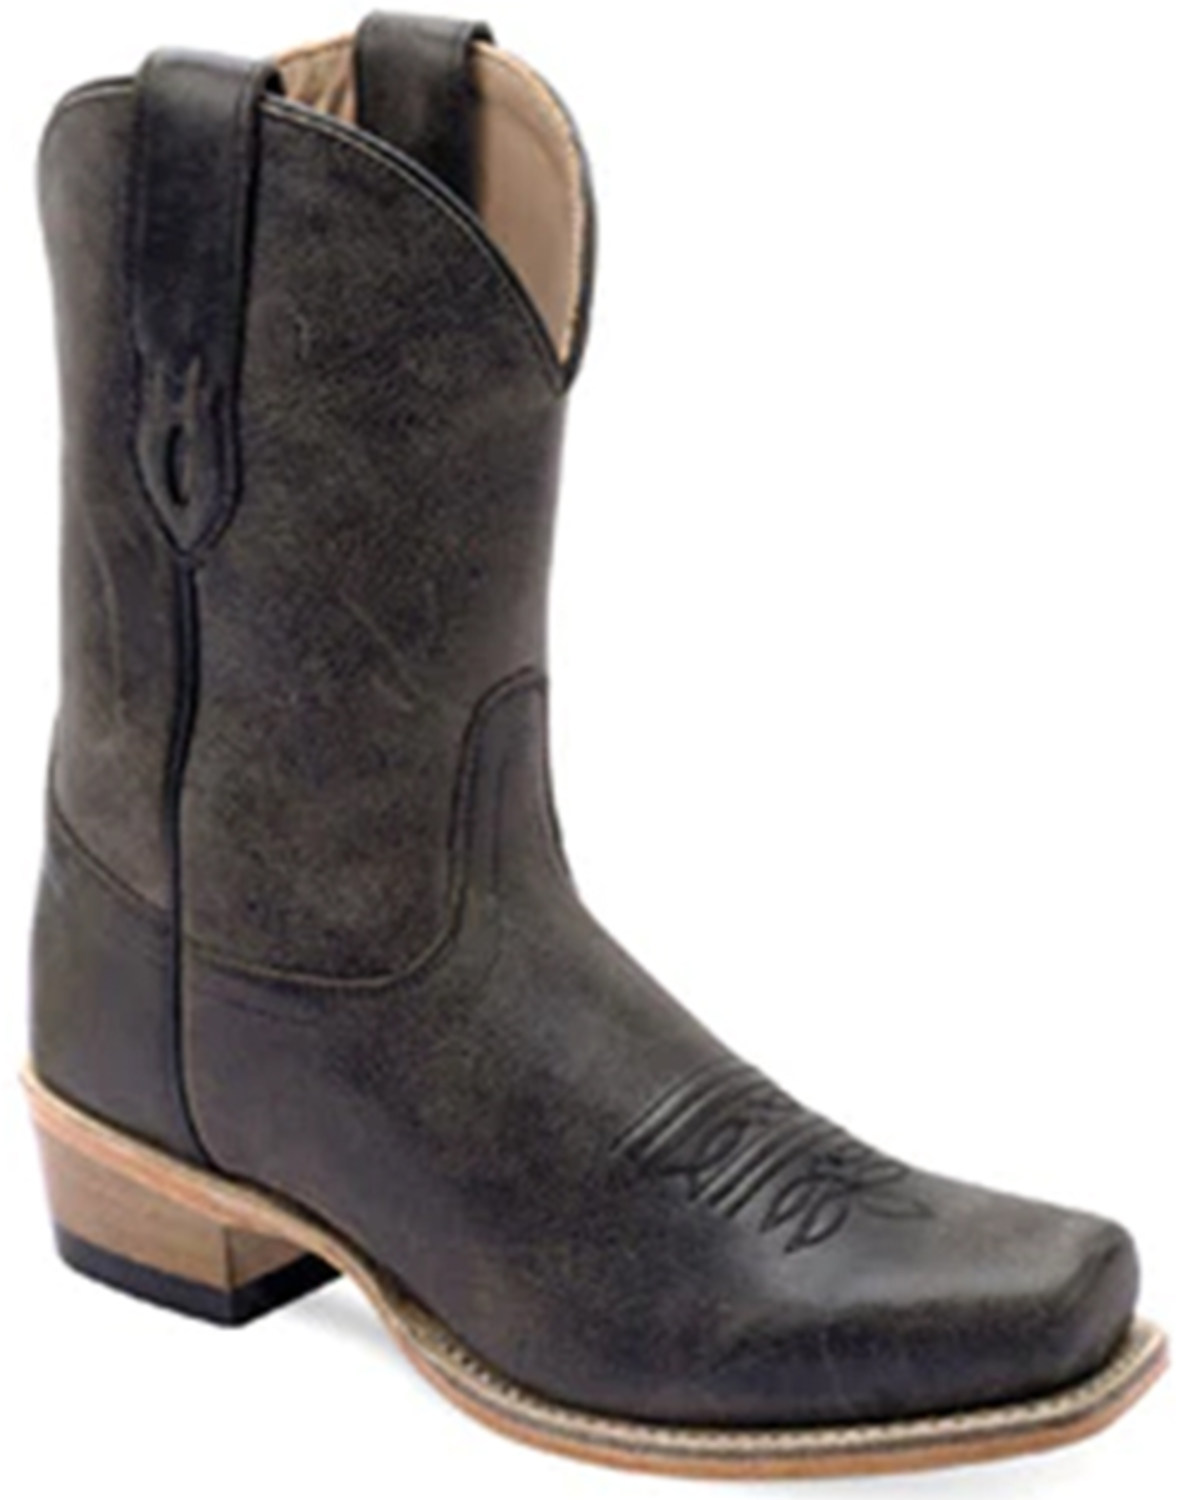 Old West Women's Western Boots - Square Toe